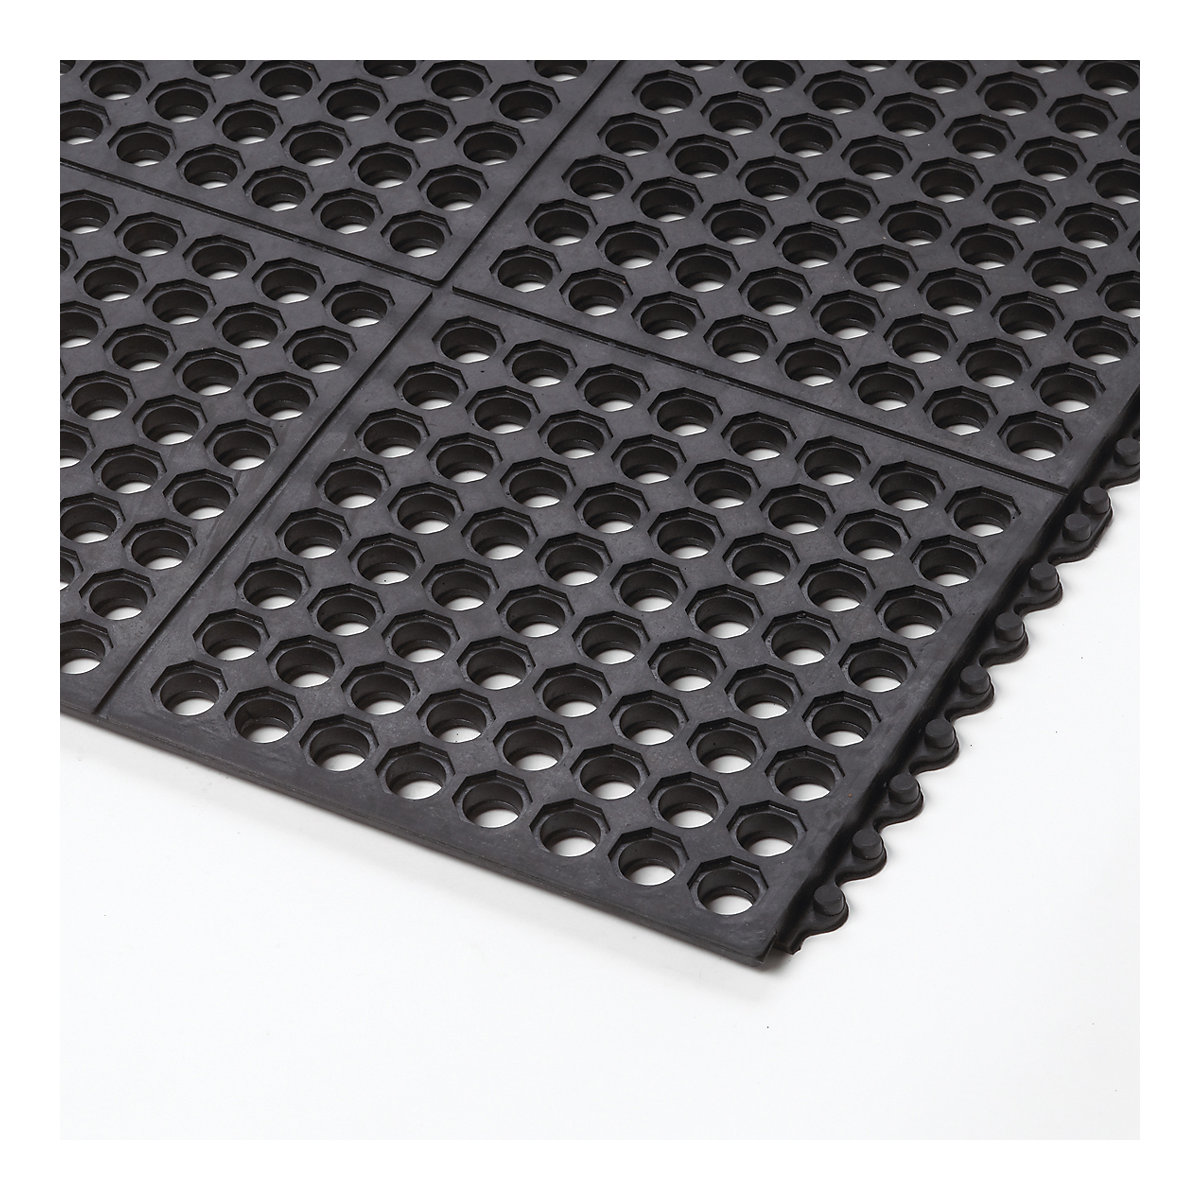 Cushion Ease™ perforated natural rubber plug-in system – NOTRAX